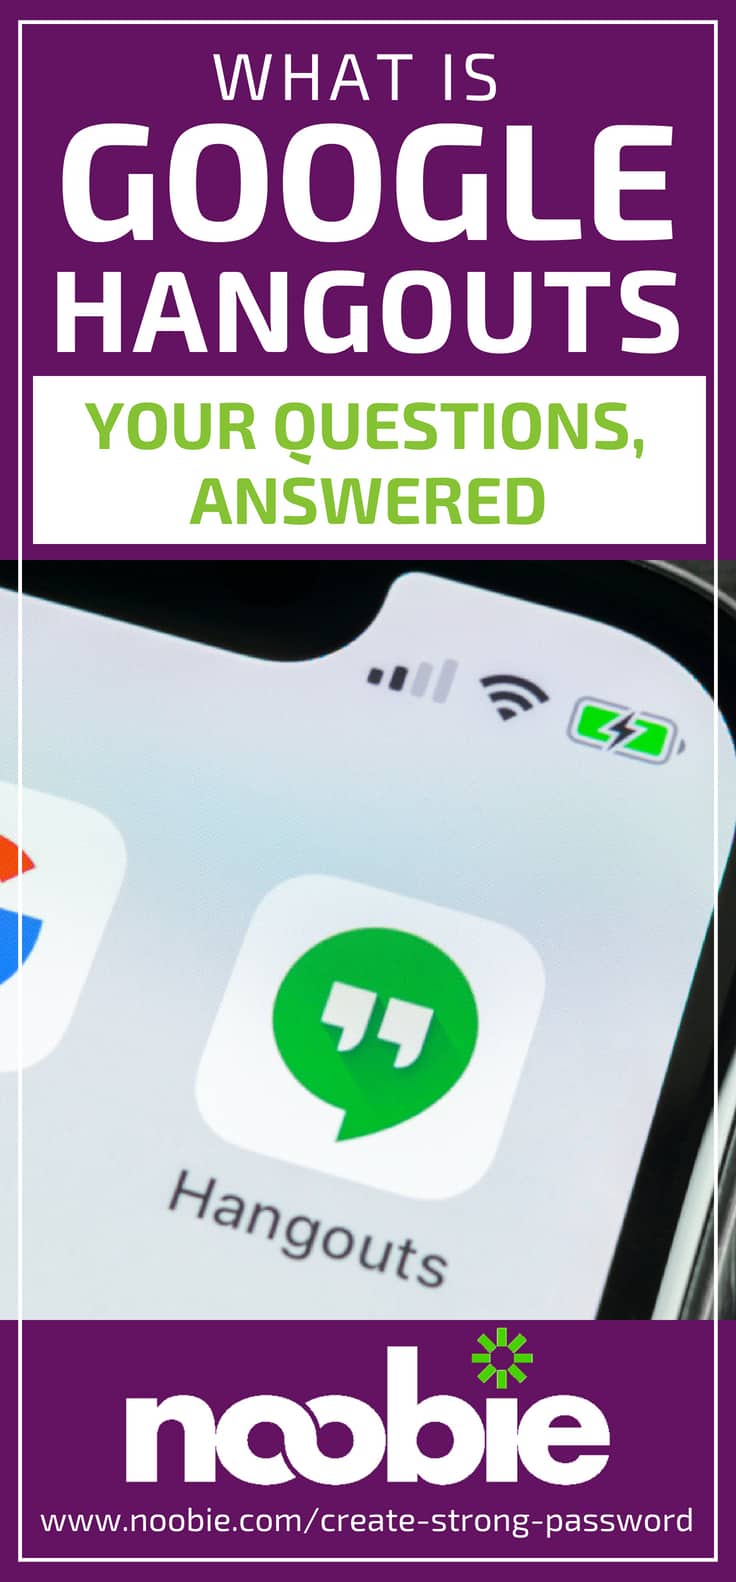 What Is Google Hangouts? Your Questions, Answered | Google | video call | messaging app | https://noobie.com/what-is-google-hangouts/